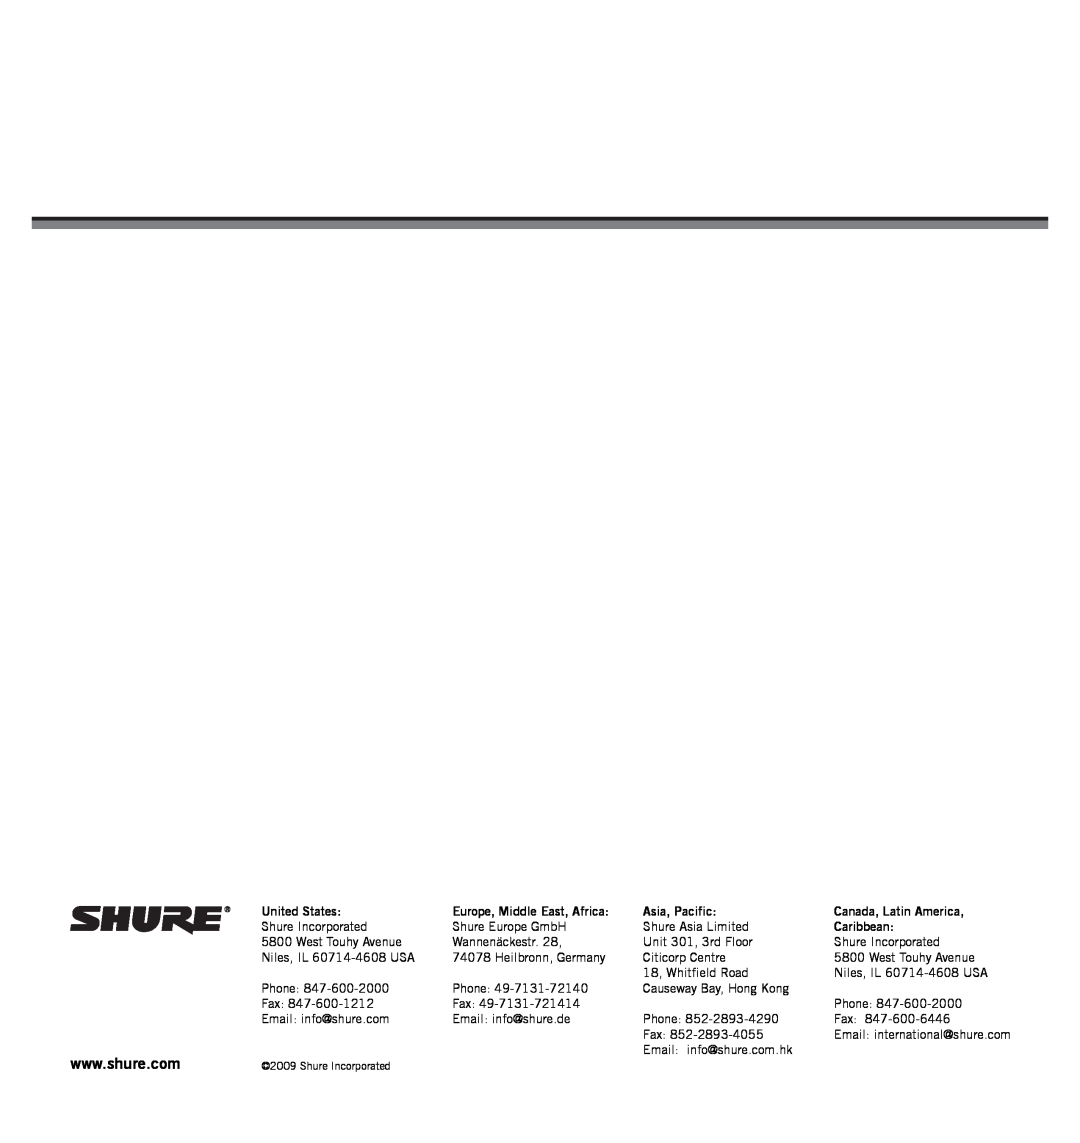 Shure 27A13709 manual United States, Europe, Middle East, Africa, Asia, Pacific, Canada, Latin America, Caribbean 